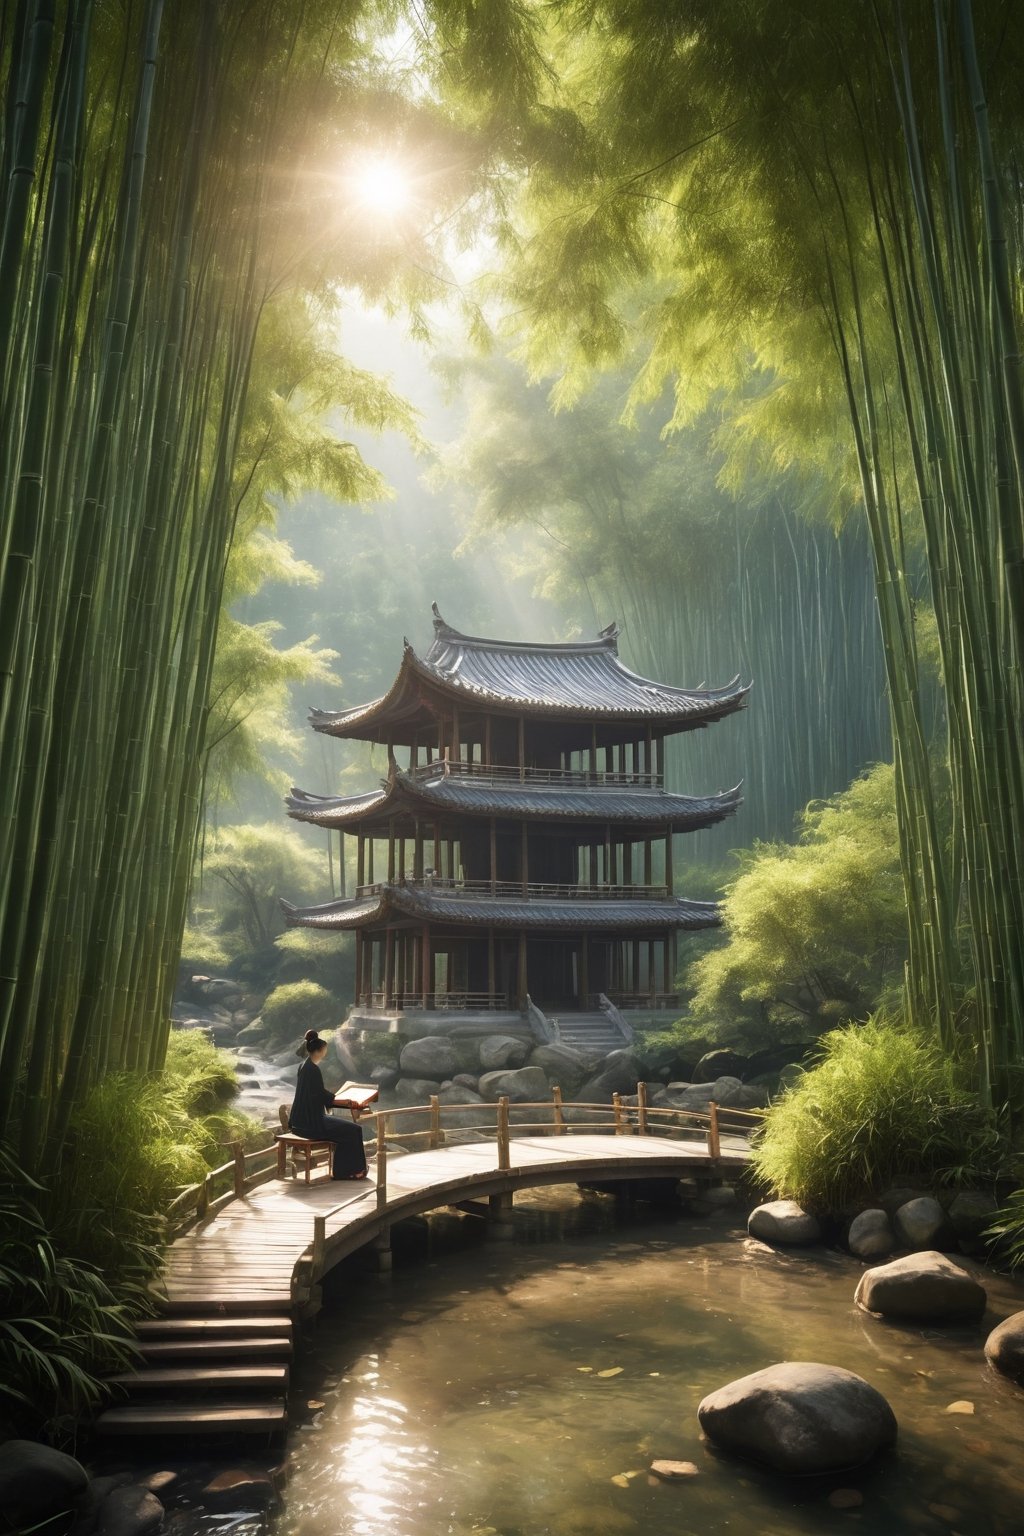 Chinese style, a quiet bamboo forest with a small pavilion and a stream next to it. A classical beauty is sitting in the pavilion playing the piano, and the sun is shining in the bamboo forest.